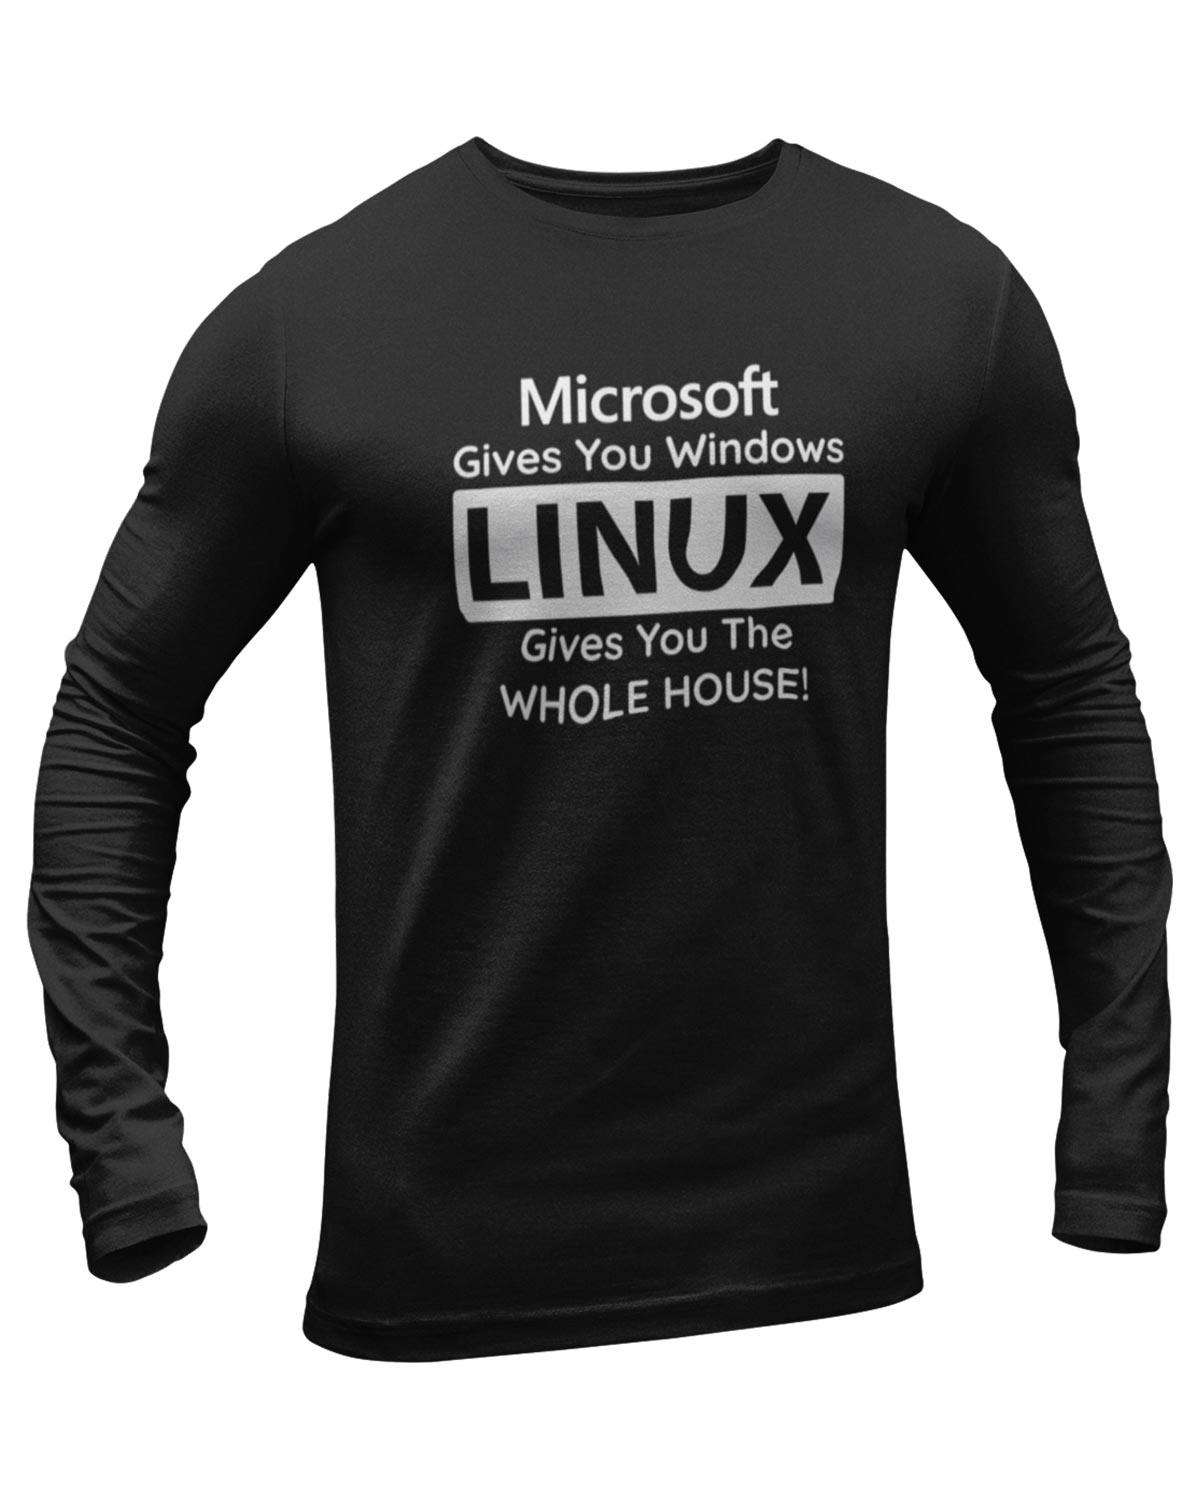 Microsoft Gives You Windows Linux Gives You Whole House Full Sleeve Geek T-Shirt